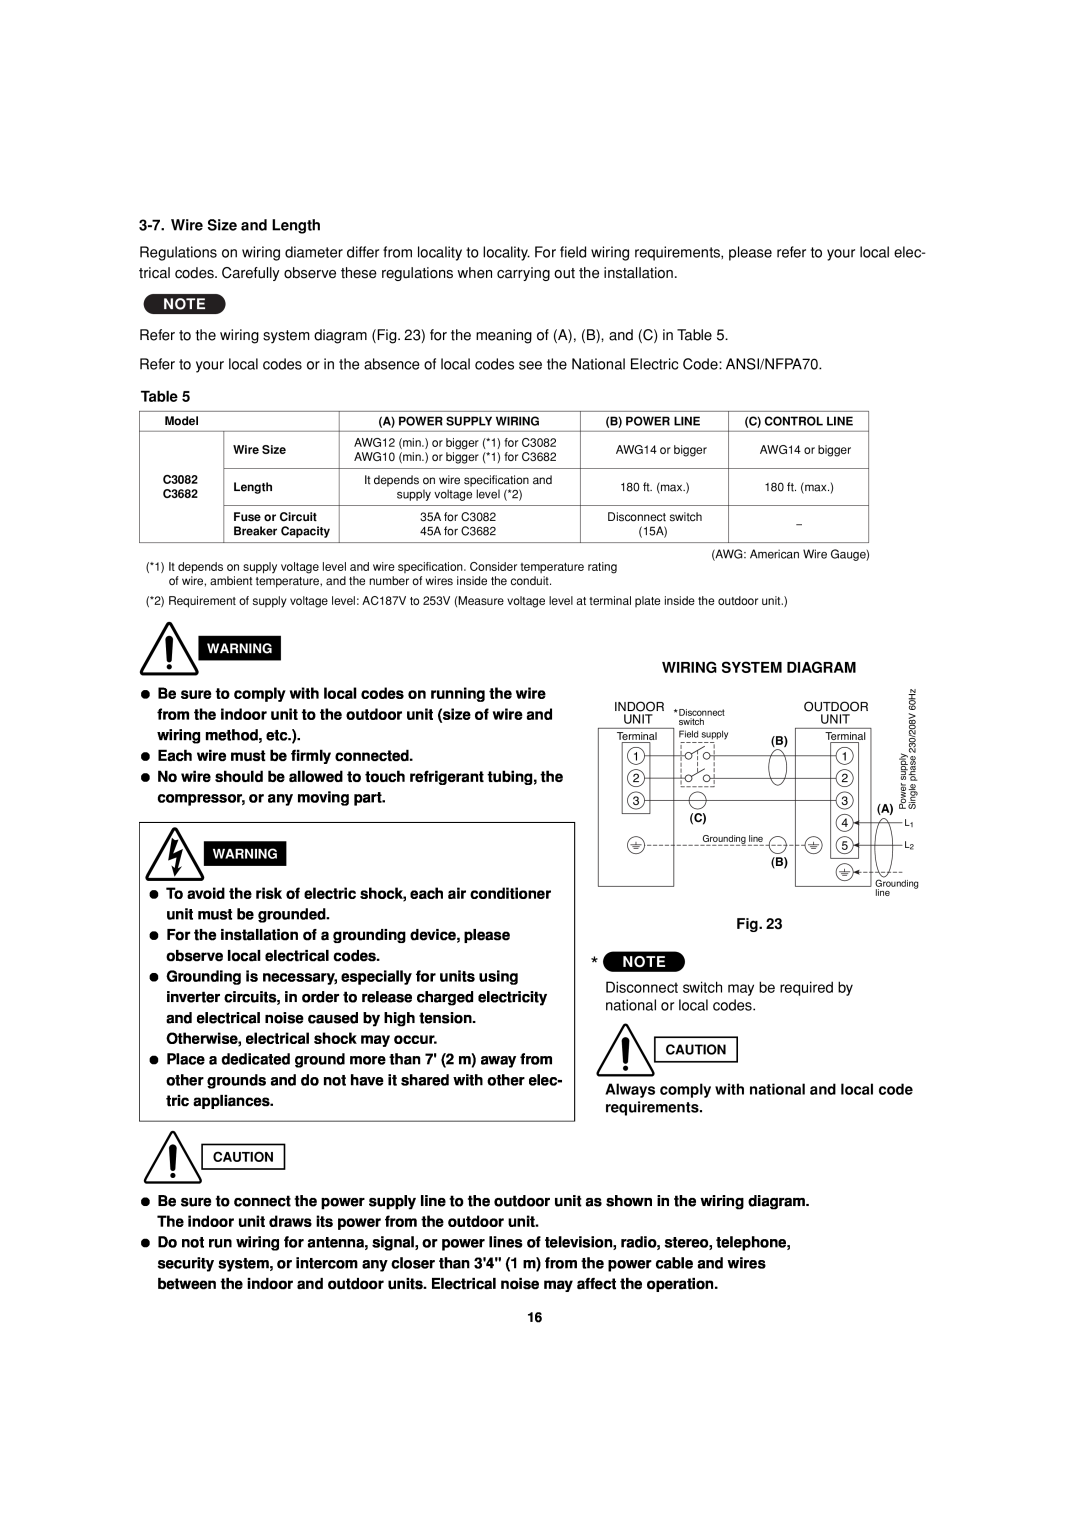 Sanyo C3082, C3682 service manual Wire Size and Length, Each wire must be firmly connected, Wiring System Diagram 